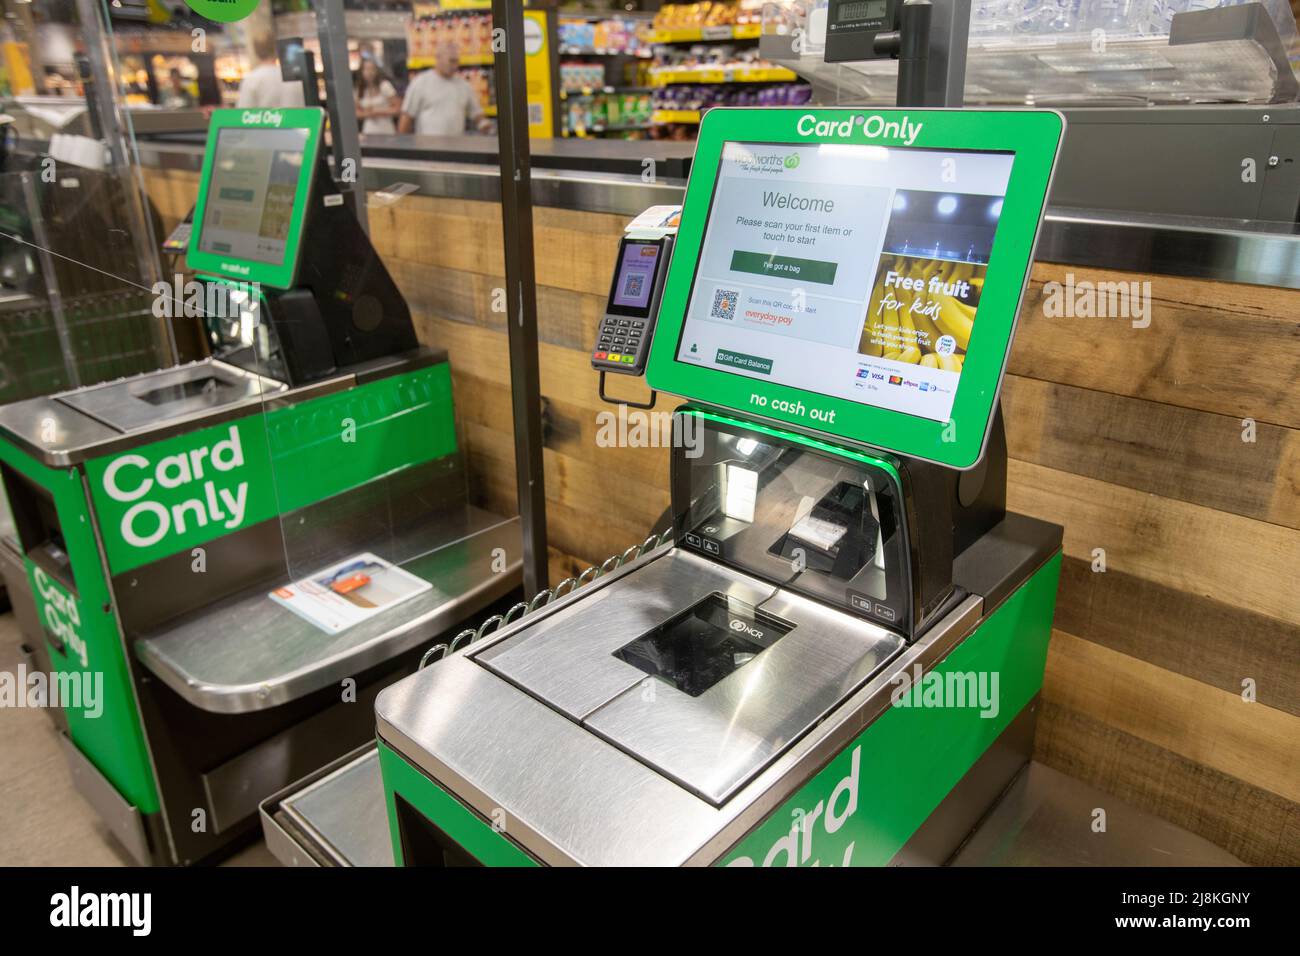 Woolworths supermarket in Sydney Australia with self service or self checkout facilities taking cards only for payment Stock Photo